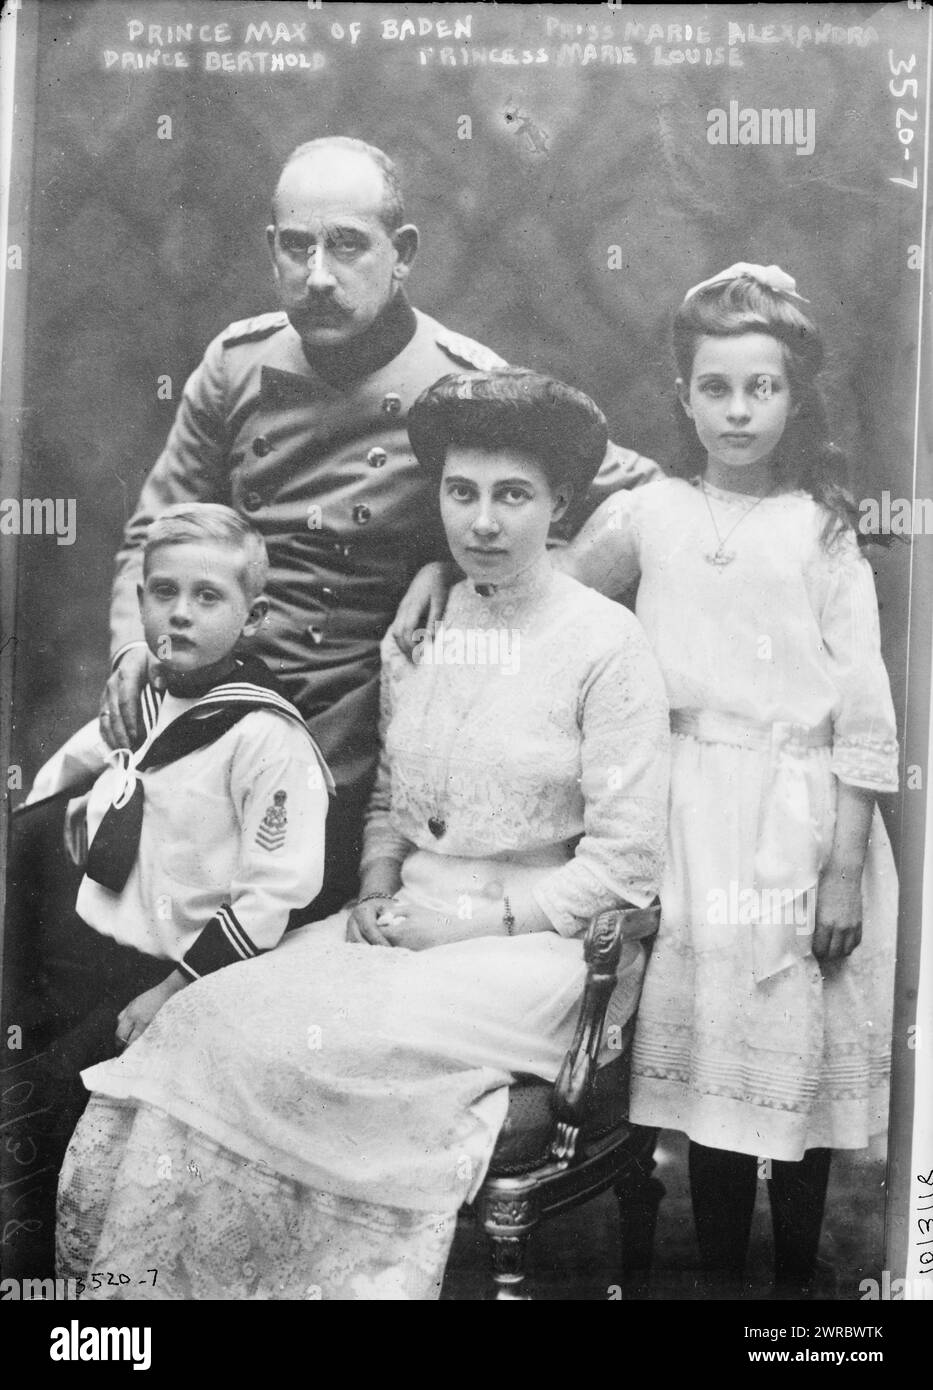 Prince Max of Baden, Pr'ss i.e., Princess Marie Alexandra, Prince Berthold, Princess Marie Louise, Photograph shows German prince and politician Maximilian Alexander Friedrich Wilhelm, Prince of Baden (1867-1929) with his wife Princess Marie Louise of Hanover and Cumberland (1879-1948), and their children, Princess Marie Alexandre of Baden (1902-1944) and Prince Berthold Margrave of Baden (1906-1963)., between ca. 1910 and ca. 1915, Glass negatives, 1 negative: glass Stock Photo